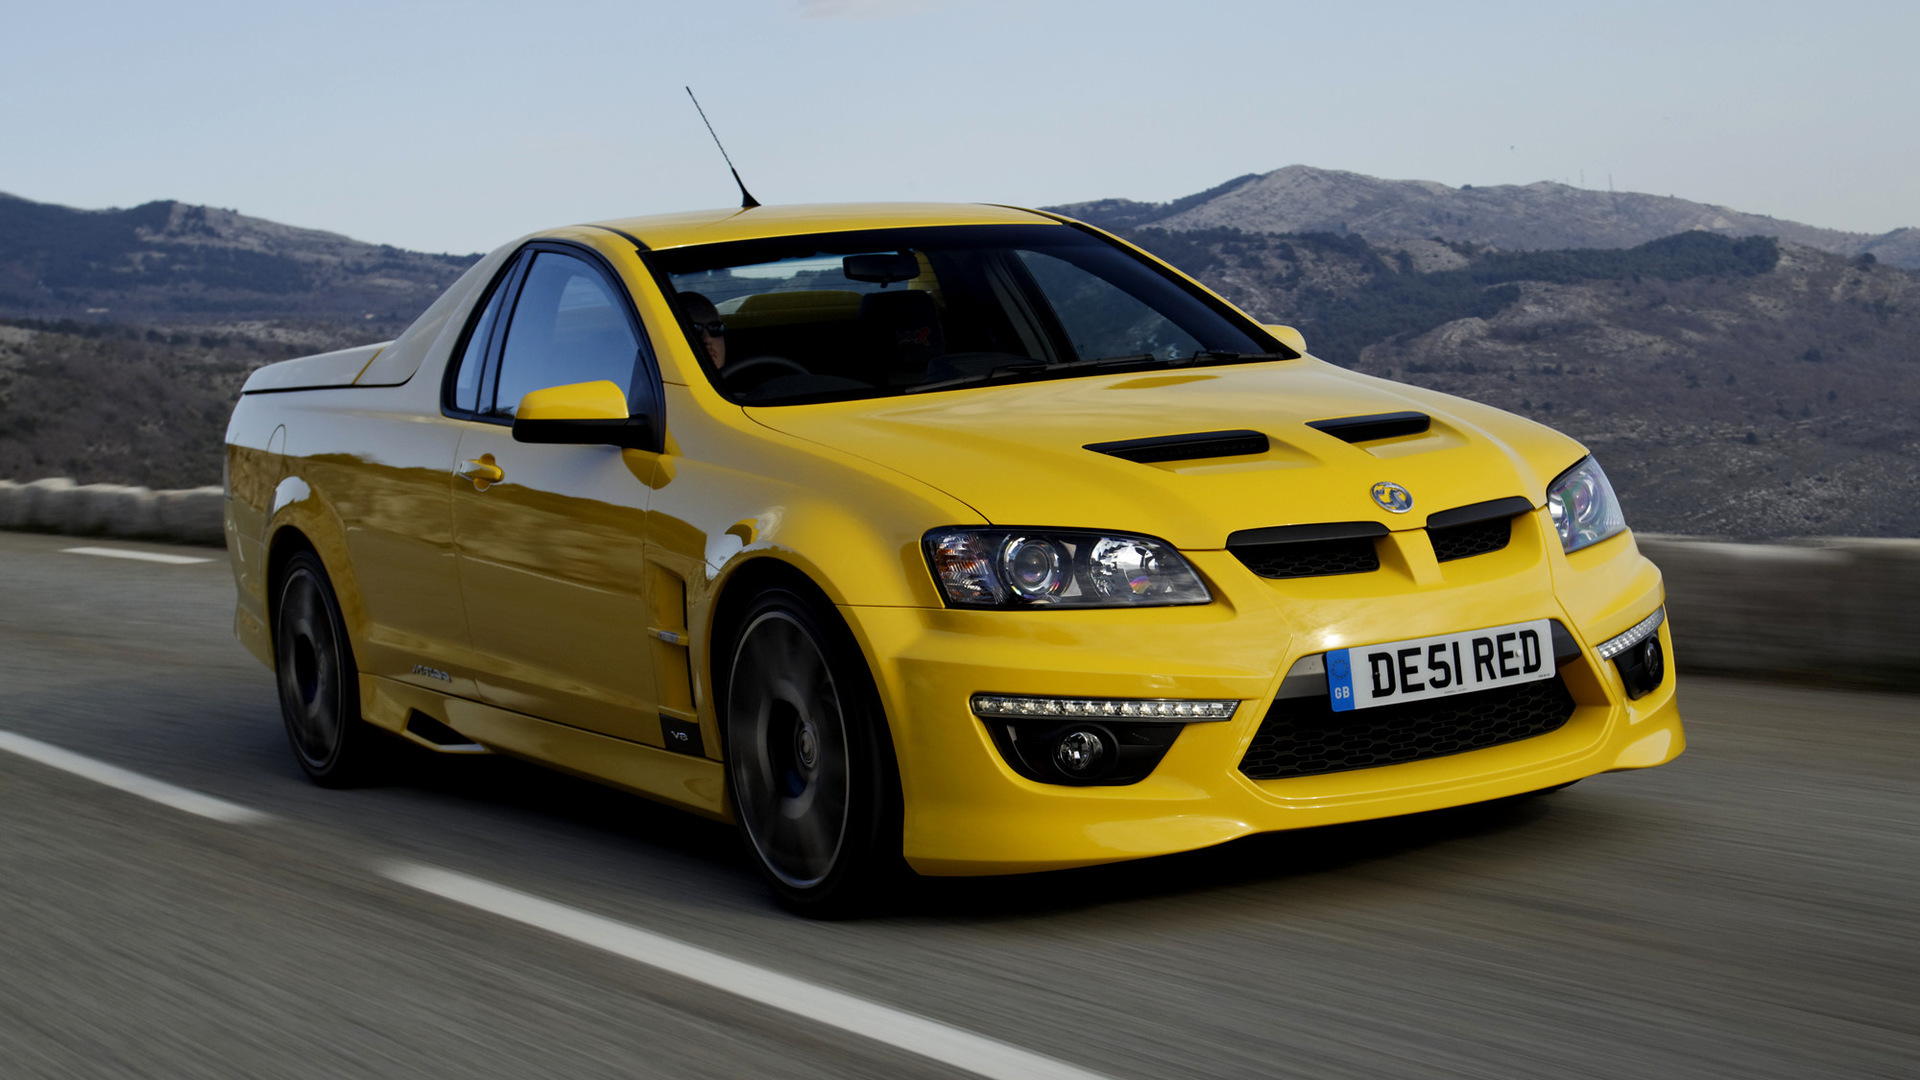 2012 Vauxhall VXR8 Maloo - Wallpapers and HD Images | Car ...